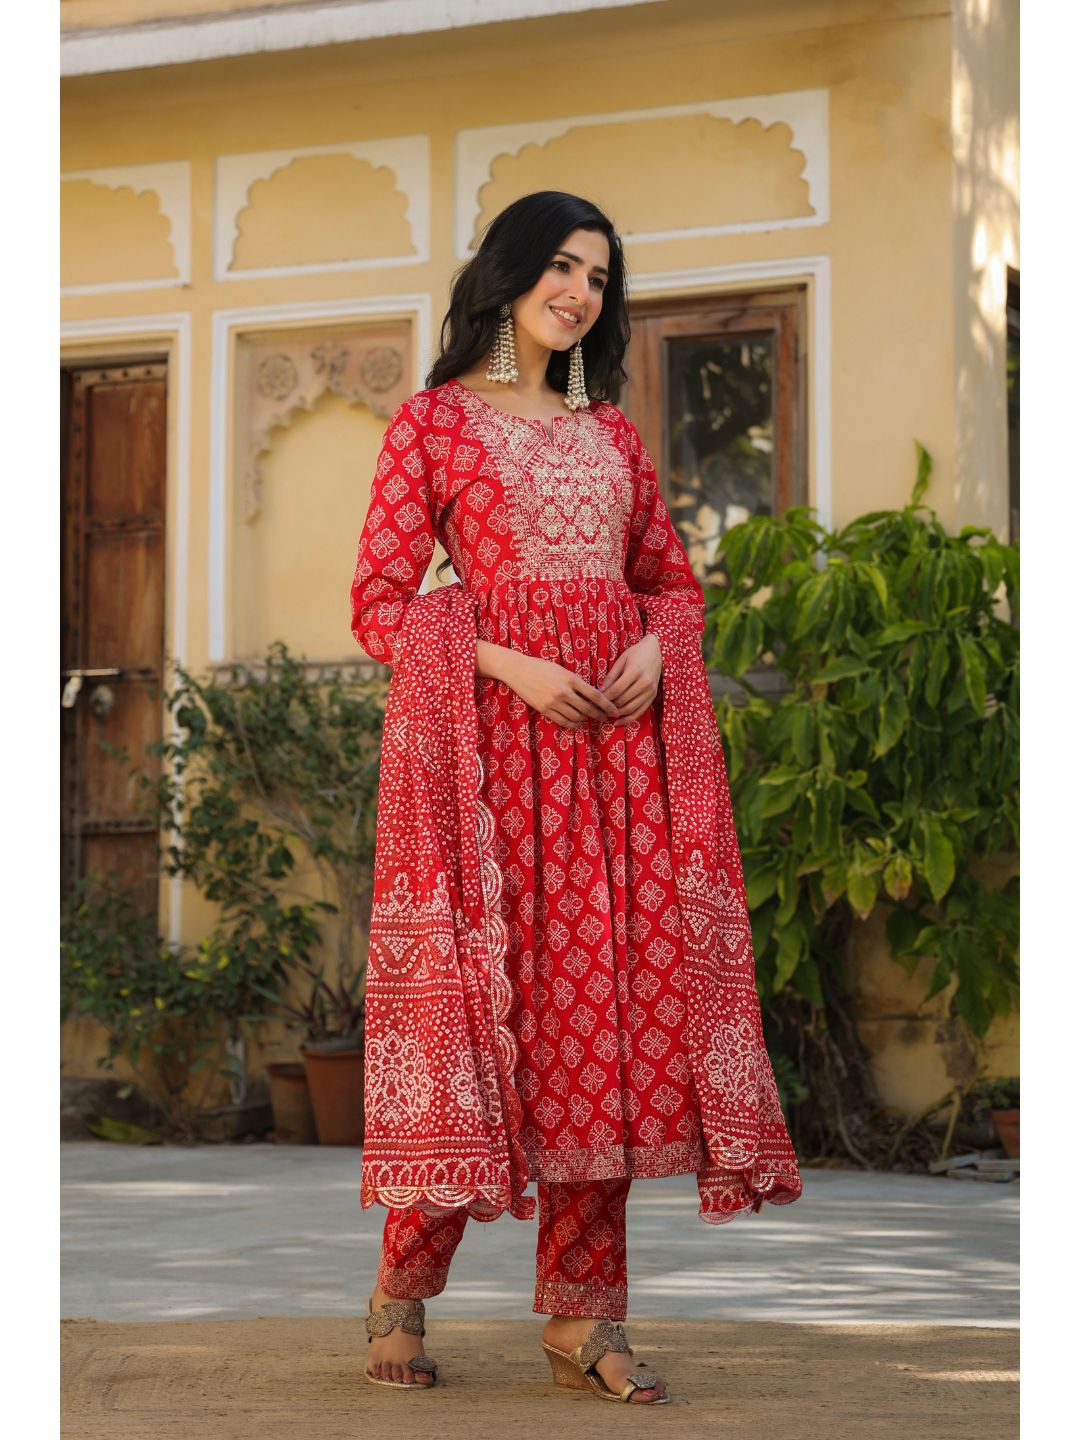 Buy LYALA FESTIVE SPECIAL RED BANDHANI SUIT SET at Amazon.in